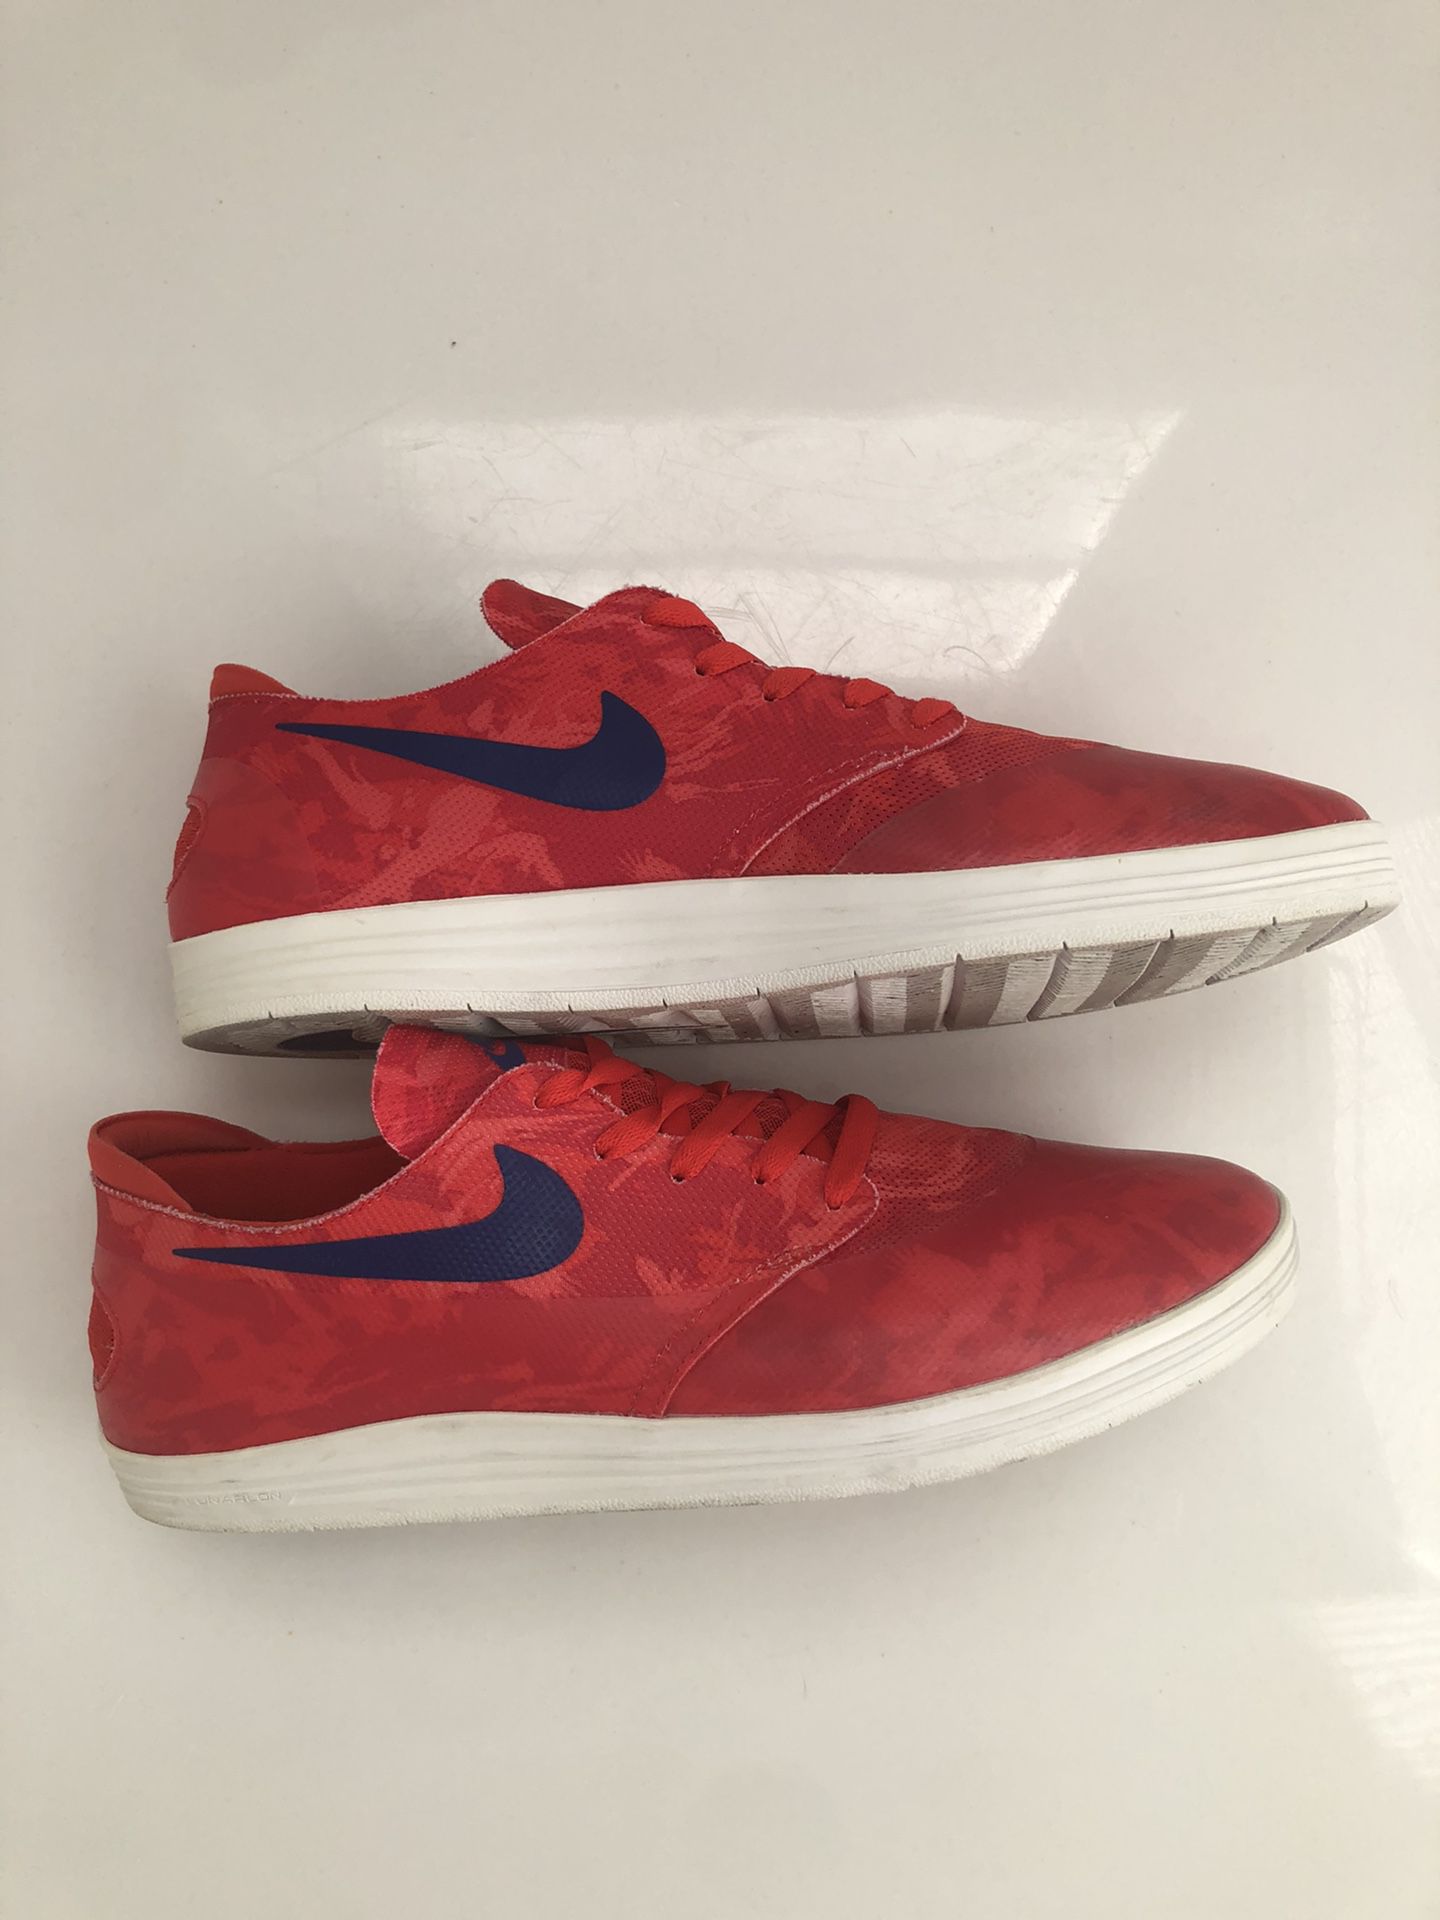 Nike One Shot 'World Cup' for Sale Princeton, FL - OfferUp